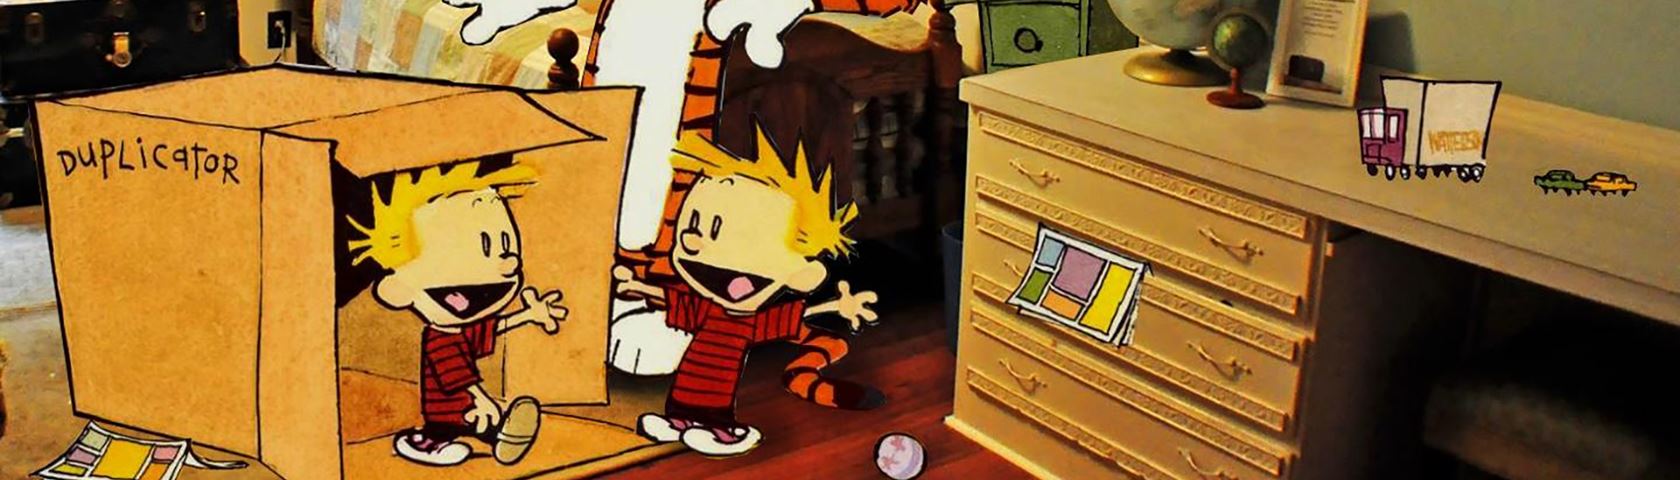 Calvin and Hobbes in the Bedroom